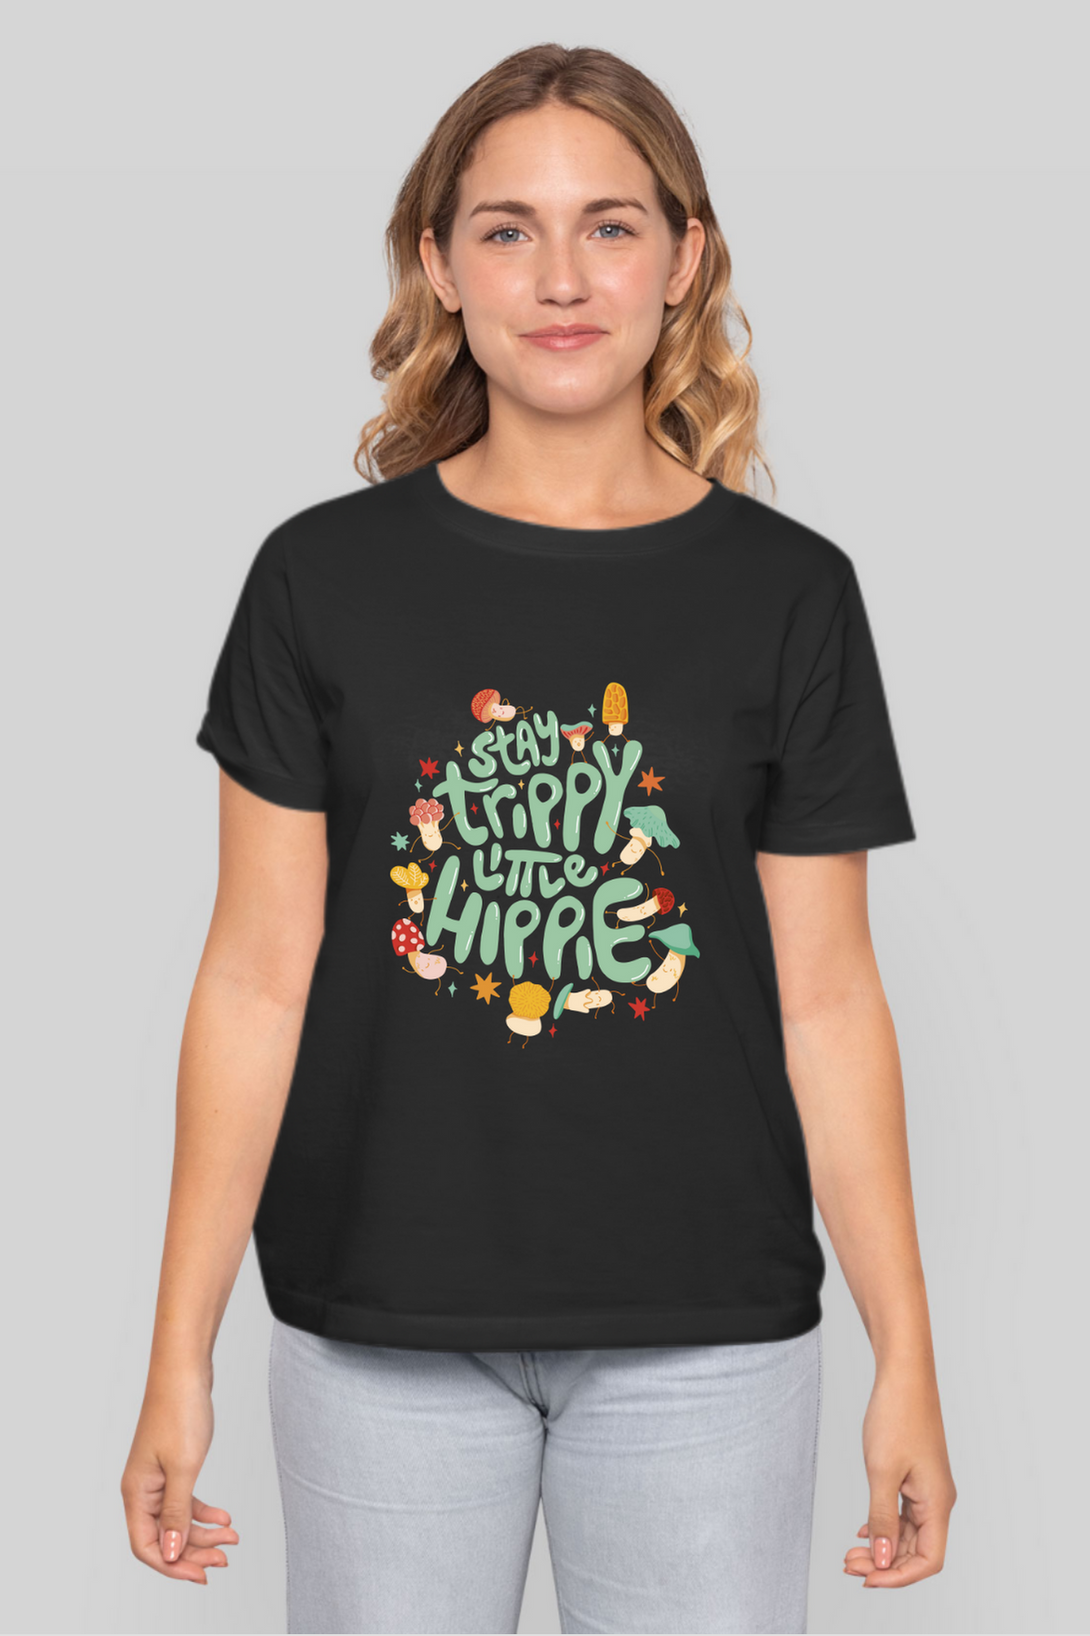 Stay Trippy Little Hippie Printed T-Shirt For Women - WowWaves - 14